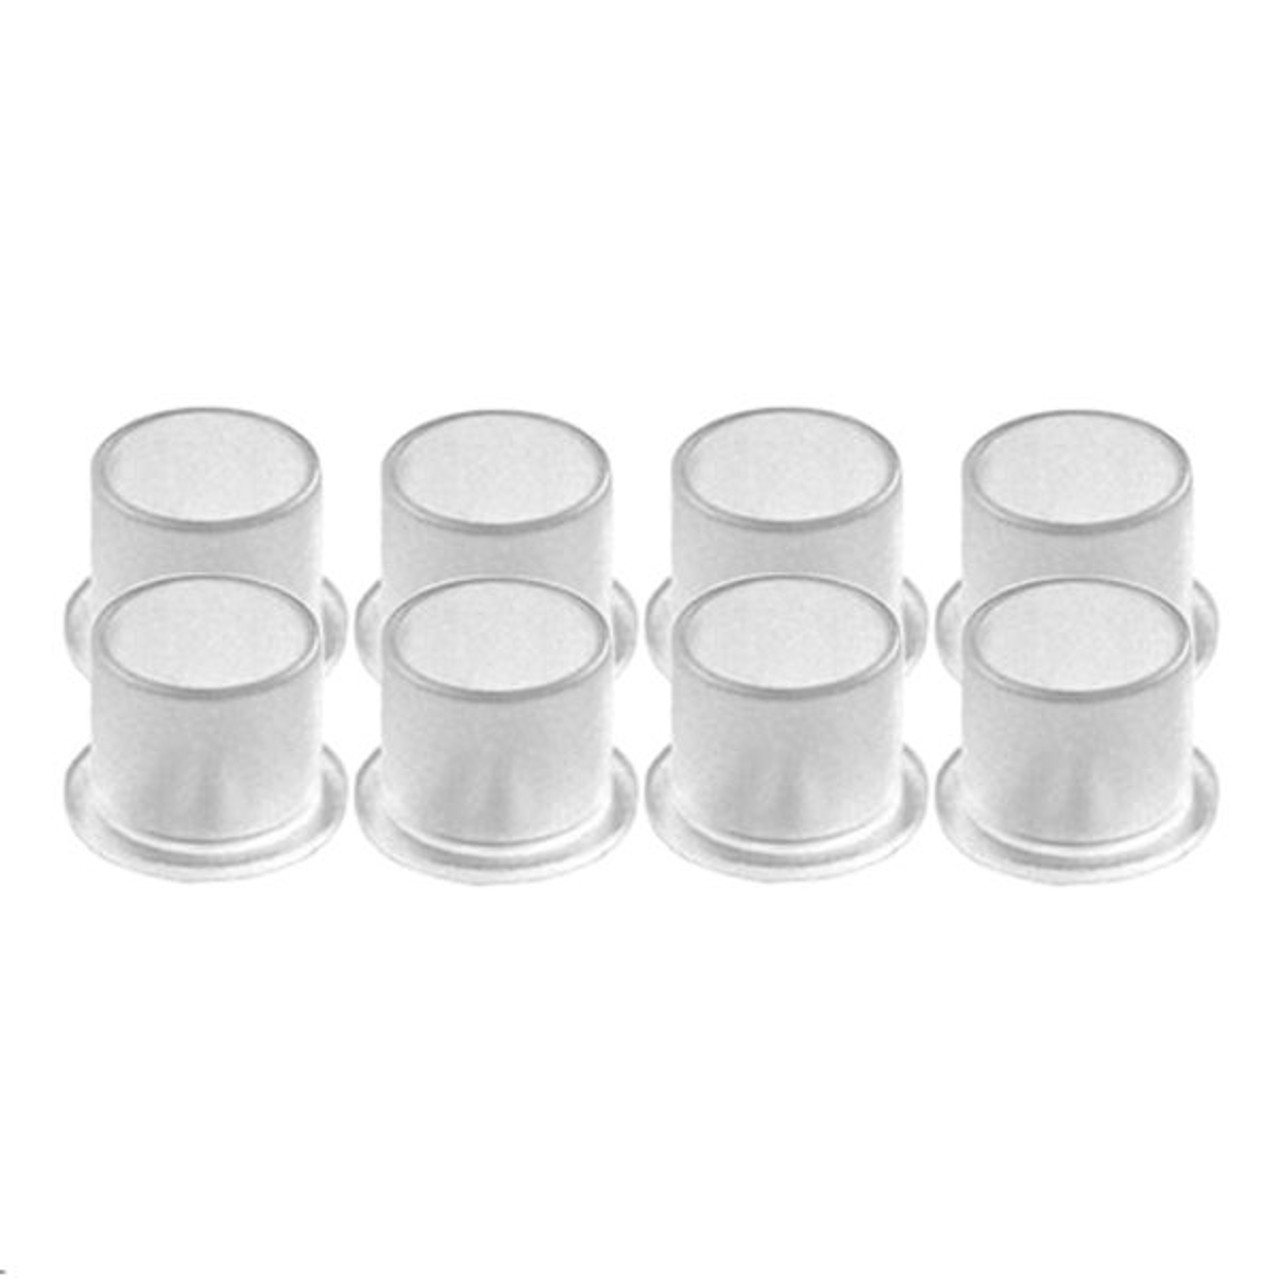 Standing Ink Cups - Ink Cups & Holders & Accessories - Tattoo Inks -  Worldwide Tattoo Supply